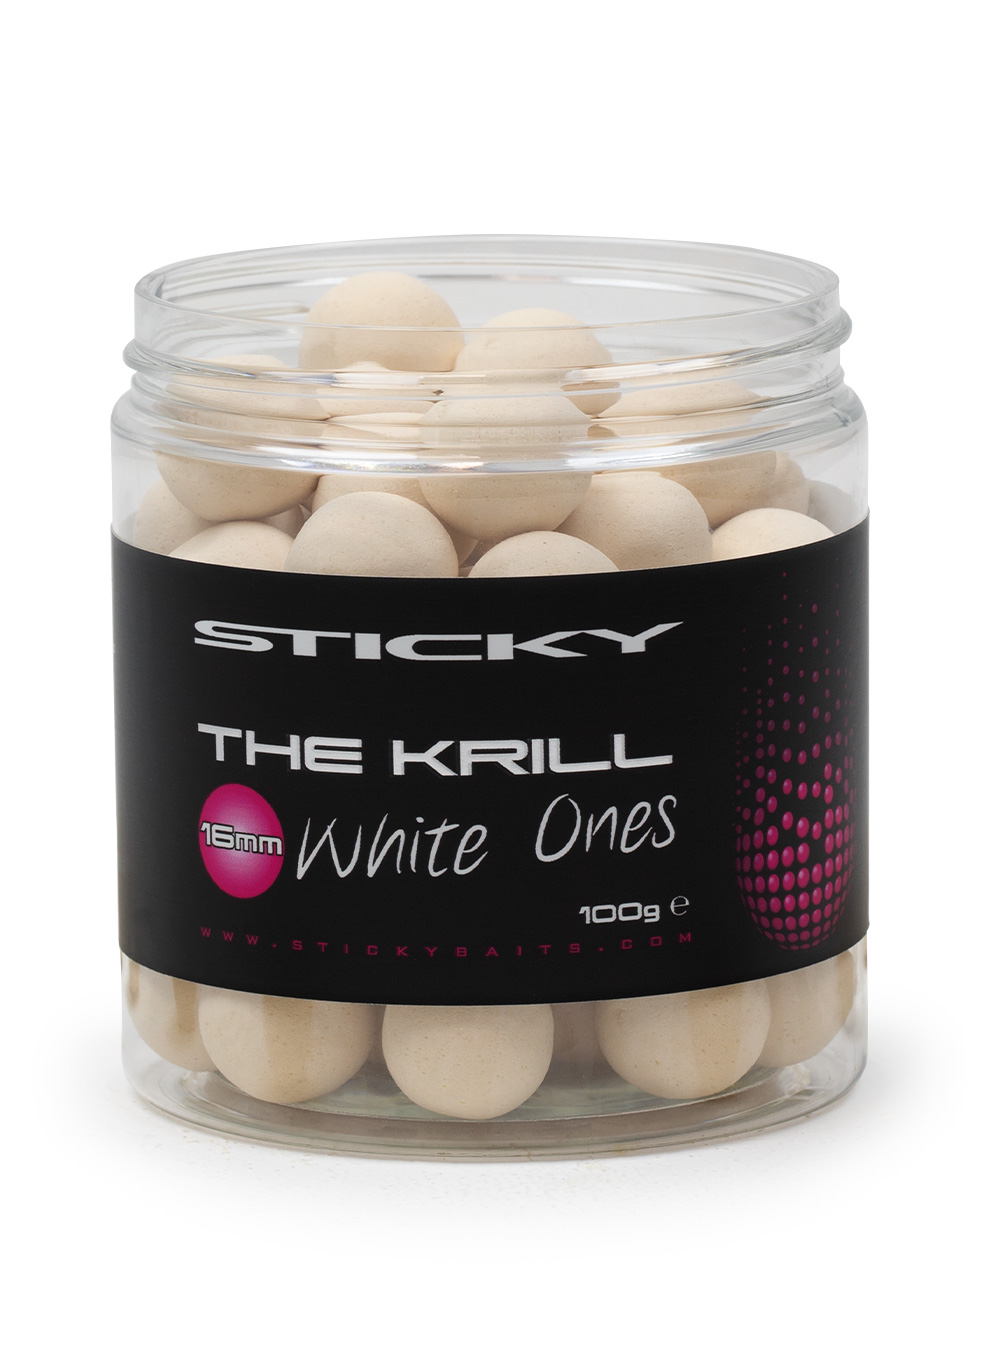 Sticky Baits - Products - The Krill White Ones - Carp Fishing Bait